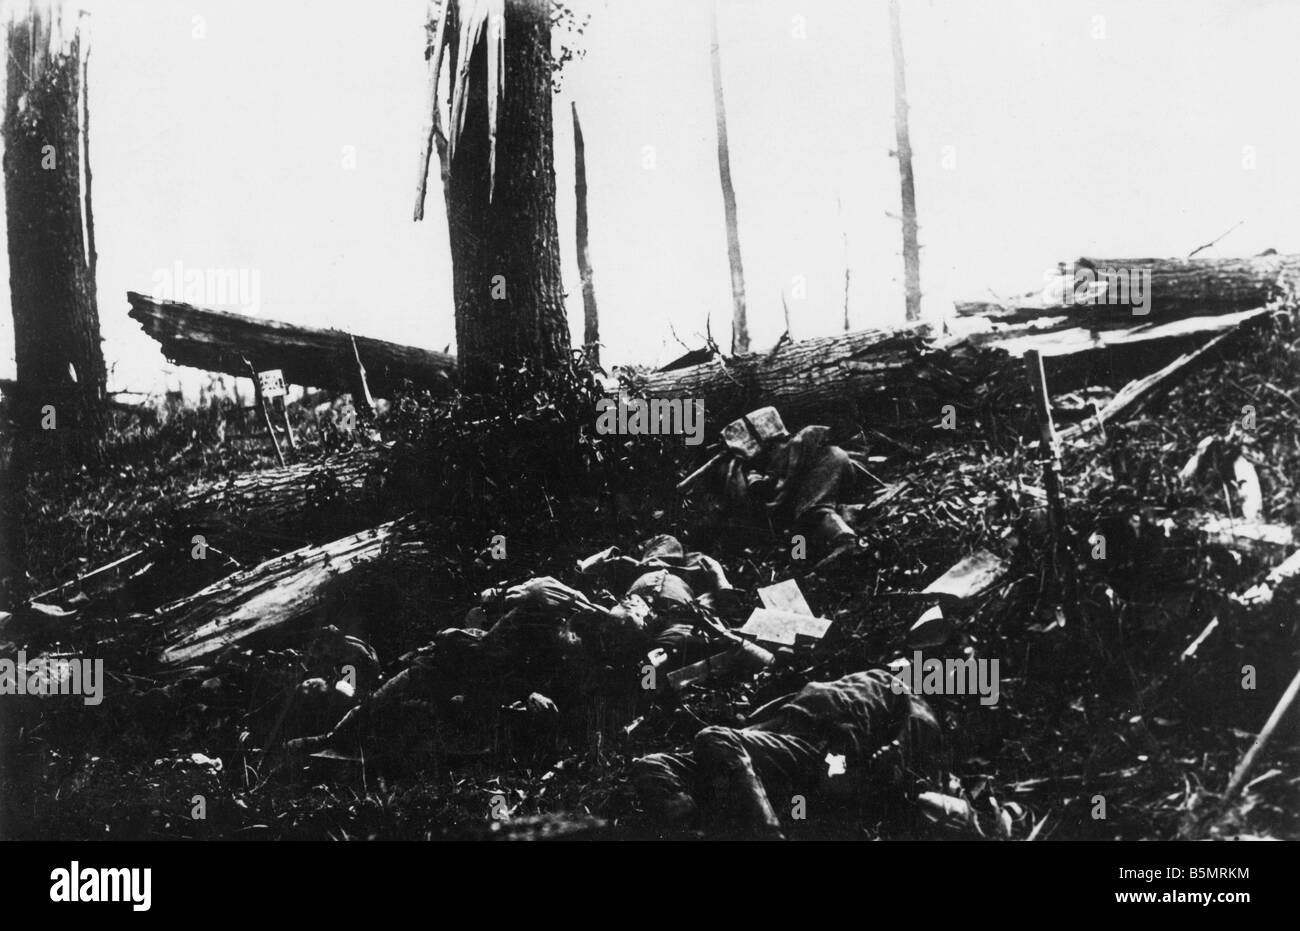 9 1918 3 0 A1 5 WW1 West Fr Destroyed battery 1918 World War 1 Western Front German major offensive March July 1918 Destroyed ba Stock Photo